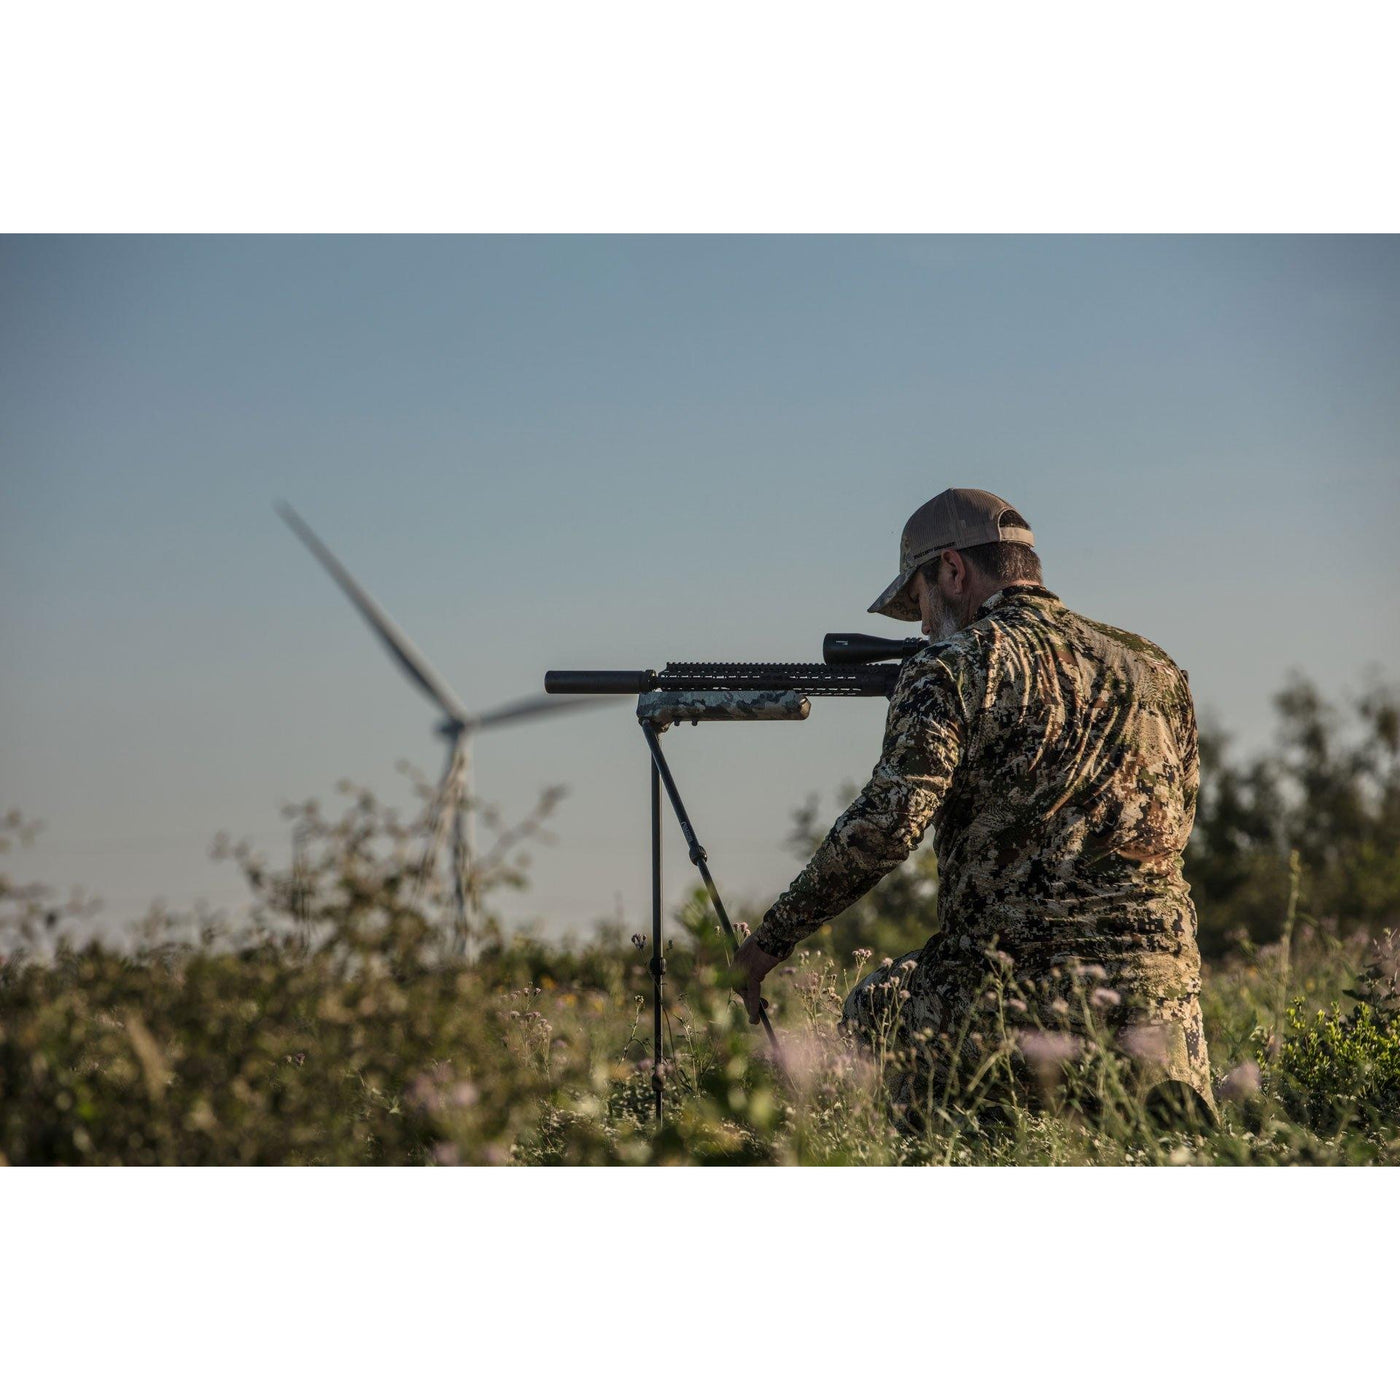 Veil Camo Swagger Hunter 42 bipod being used in South Texas